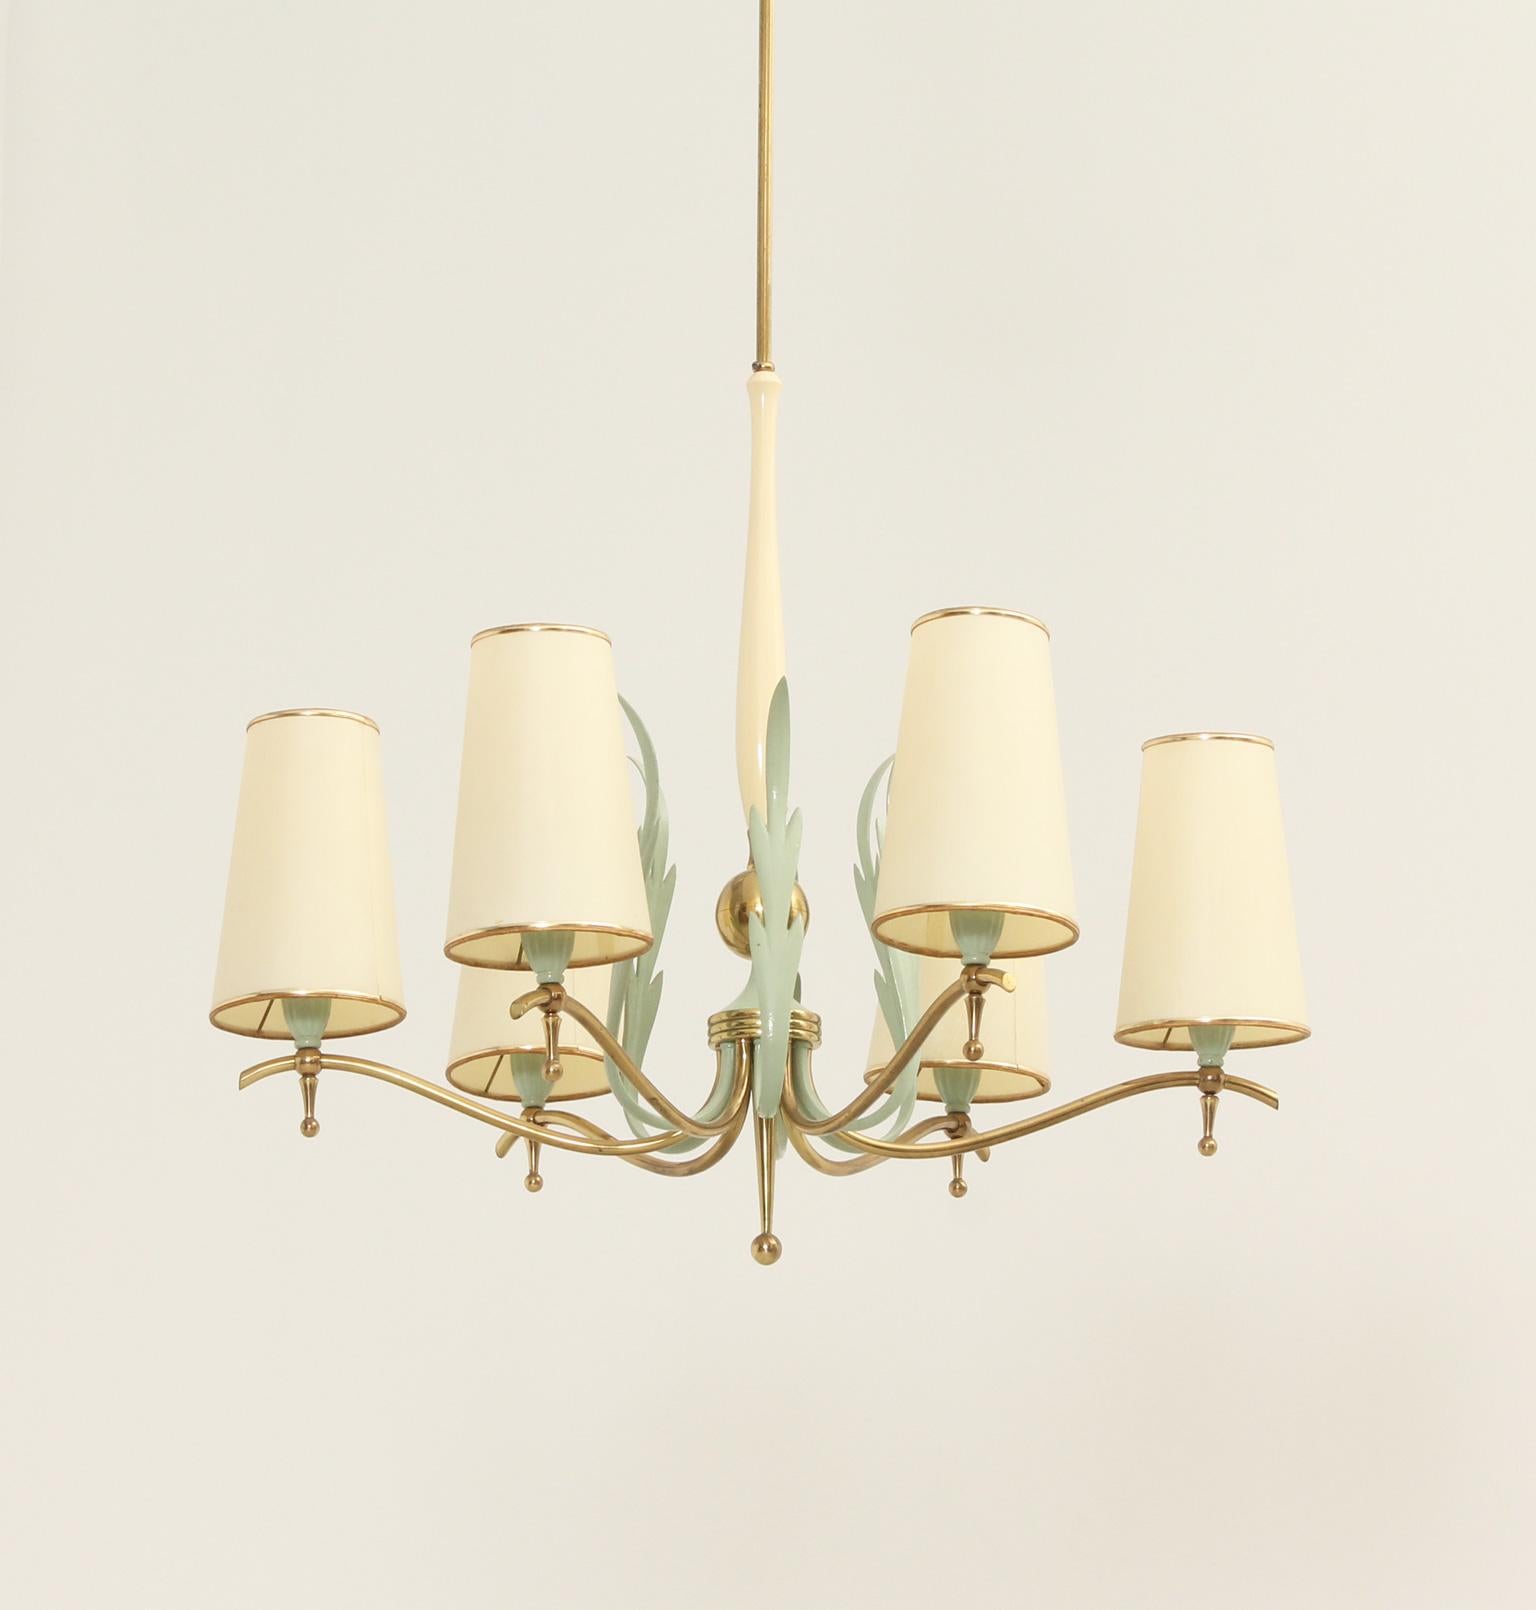 Italian Pendant Lamp with Six Arms by Stilnovo, Italy, 1940's For Sale